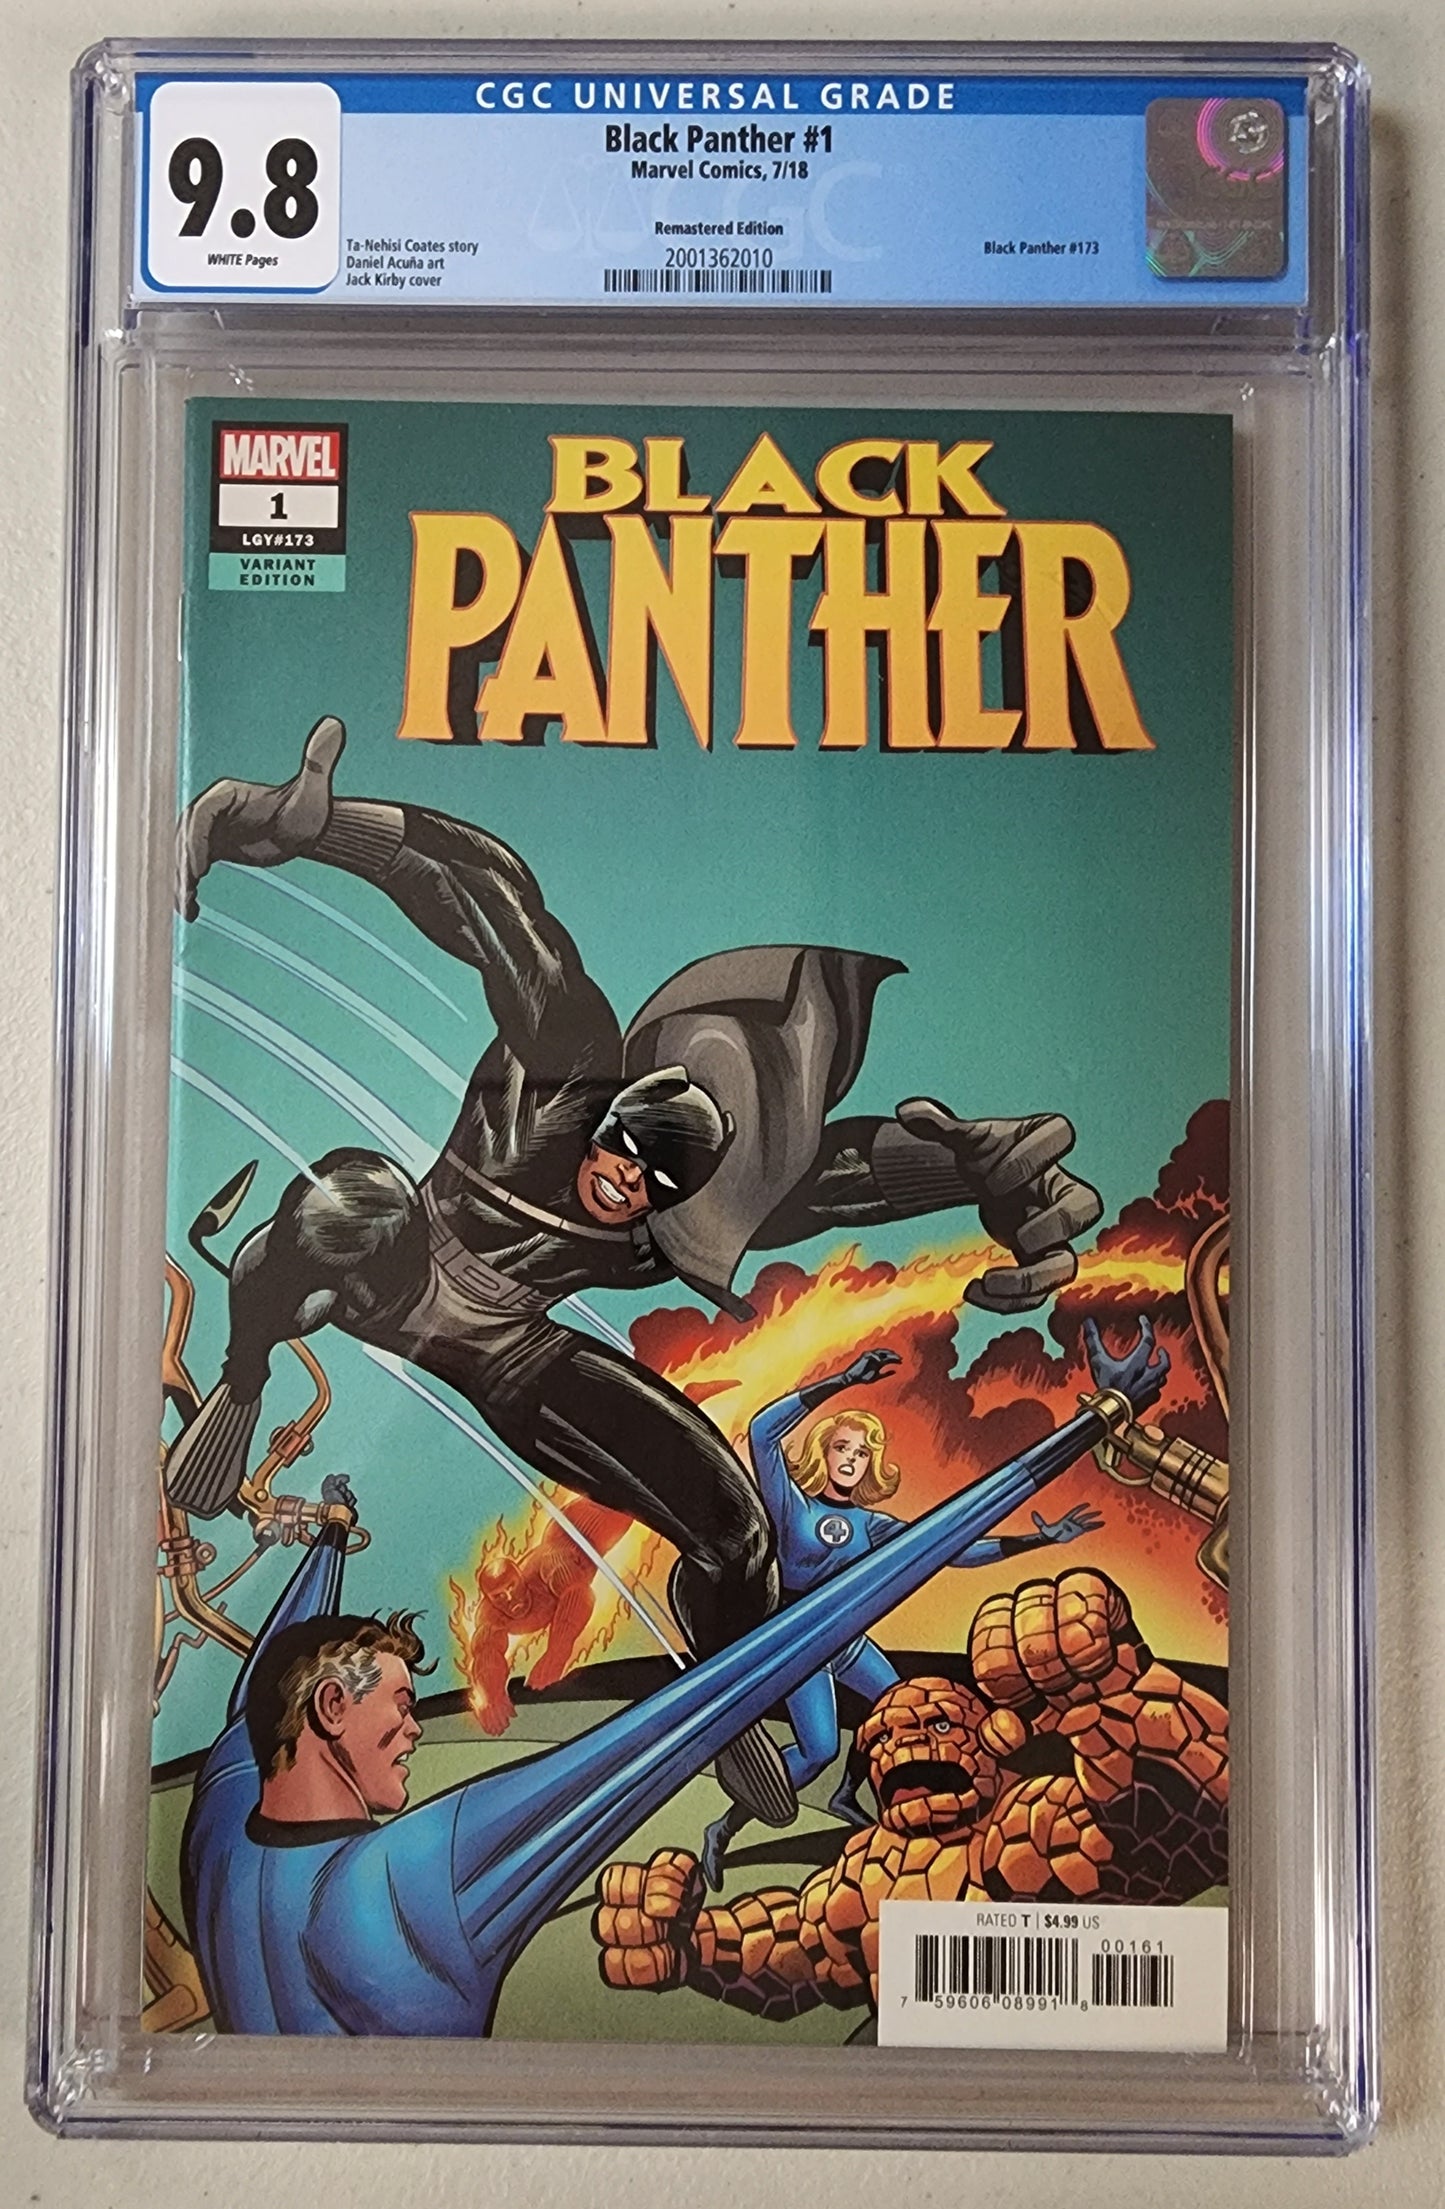 9.8 CGC Black Panther #1 1:500 Remastered Variant Kirby 2018 [2001362010]